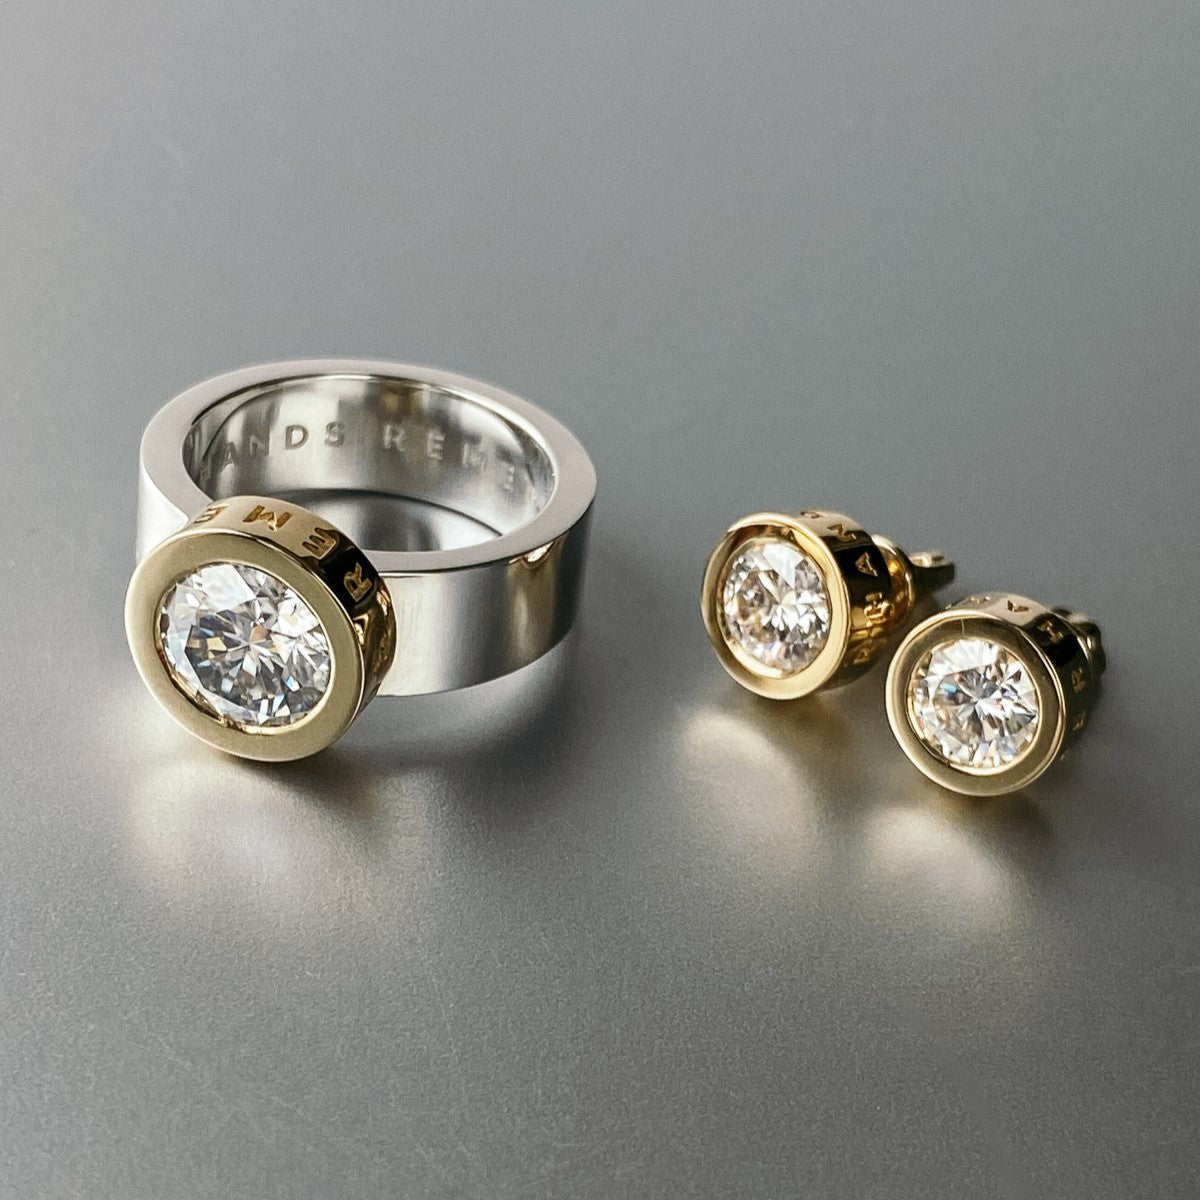 SET "STONE BALL" WITH MOISSANITE | SOLID GOLD & SILVER